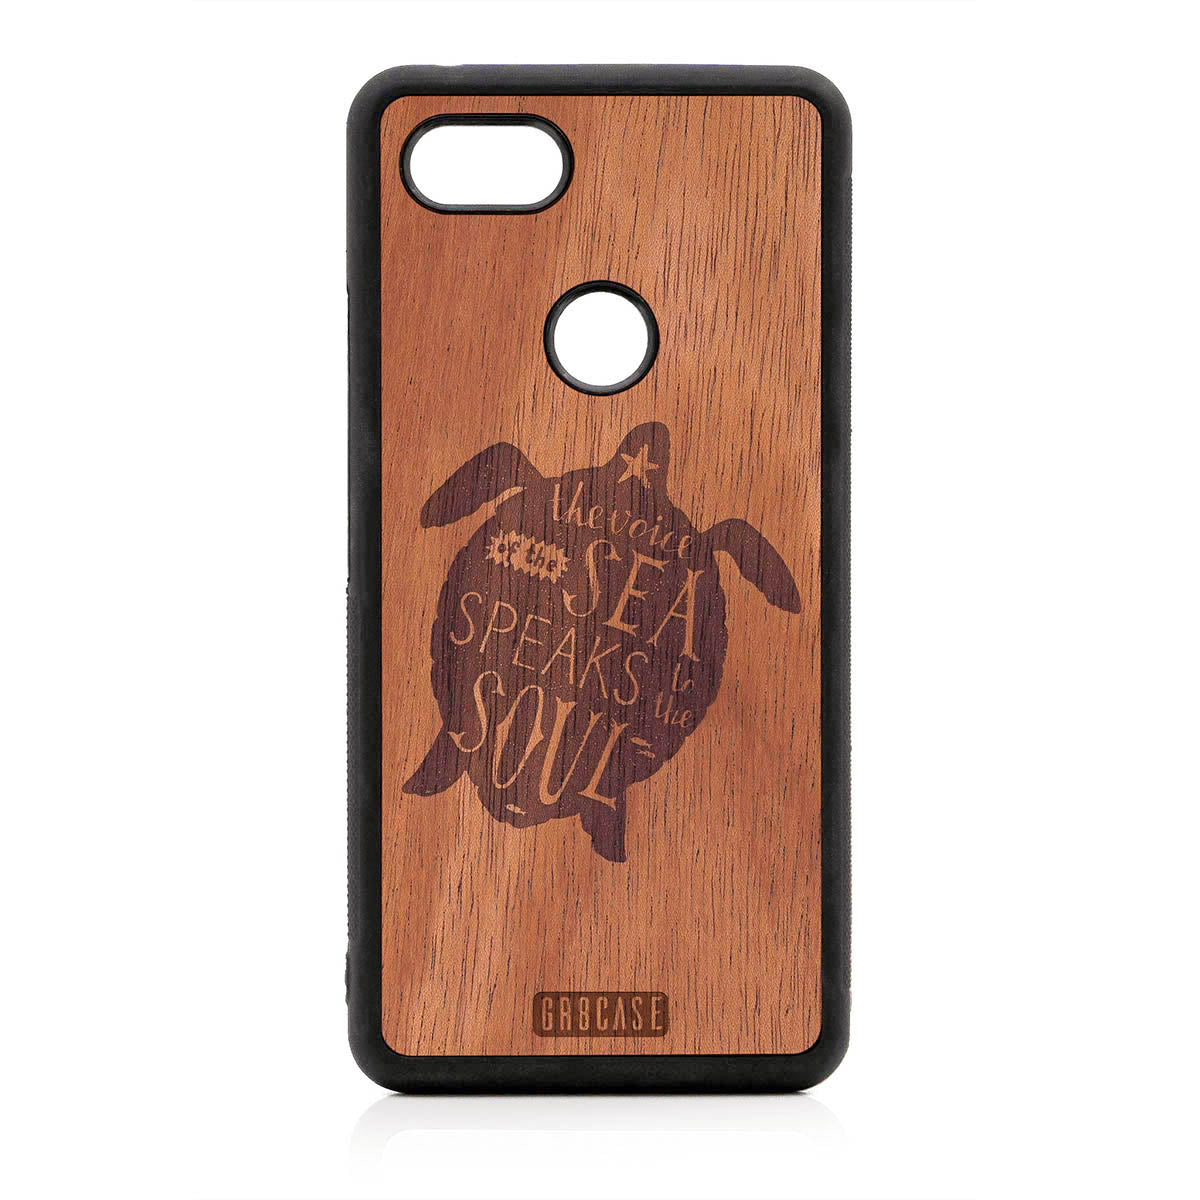 The Voice Of The Sea Speaks To The Soul (Turtle) Design Wood Case For Google Pixel 3 XL